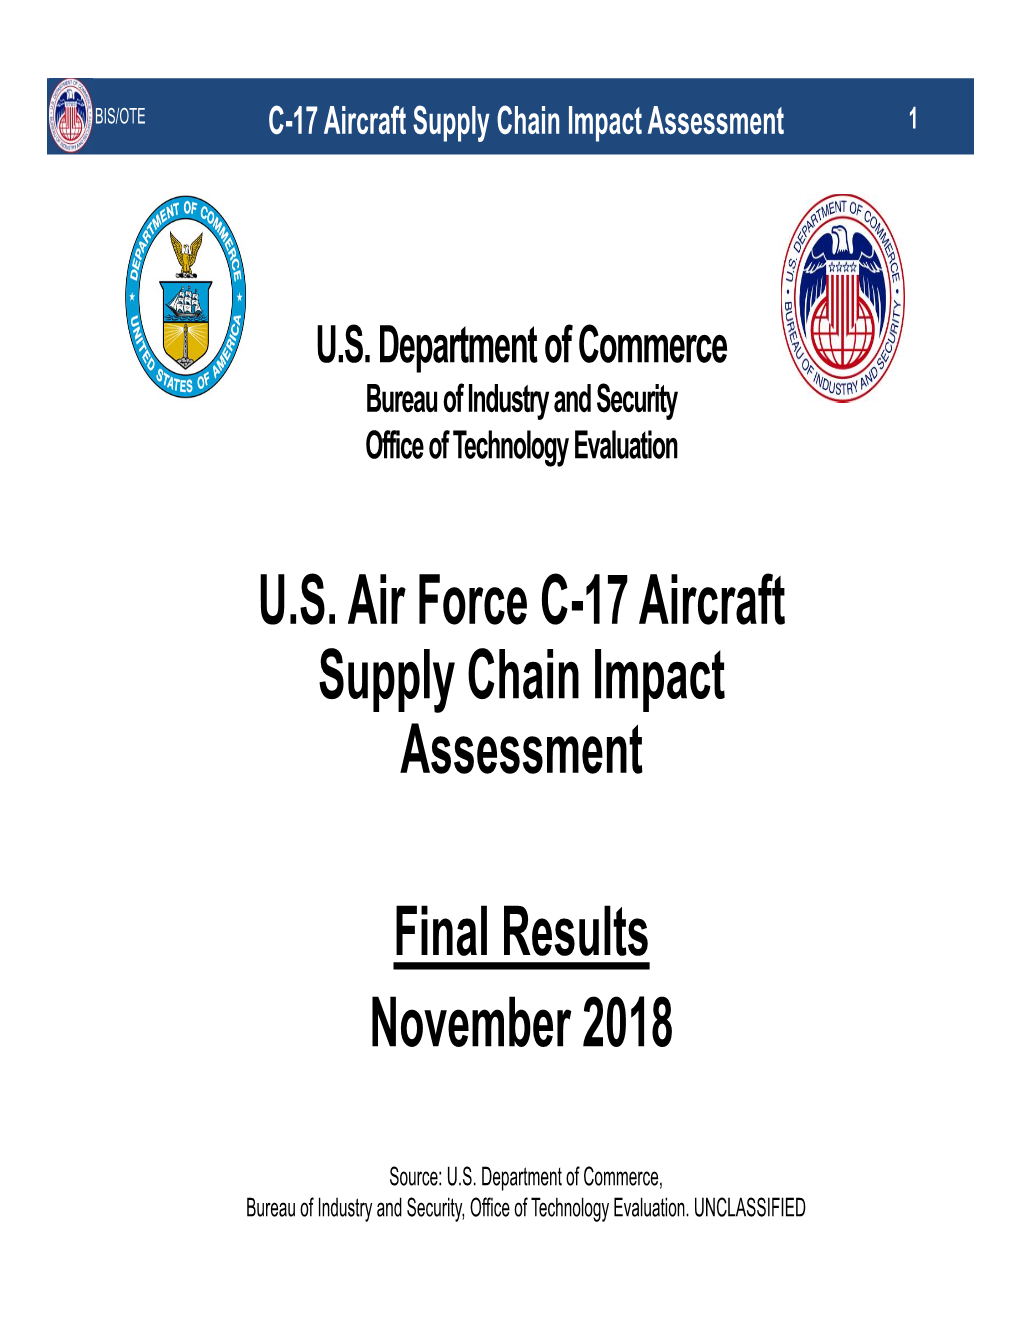 U.S. Air Force C-17 Aircraft Supply Chain Impact Assessment – 2018